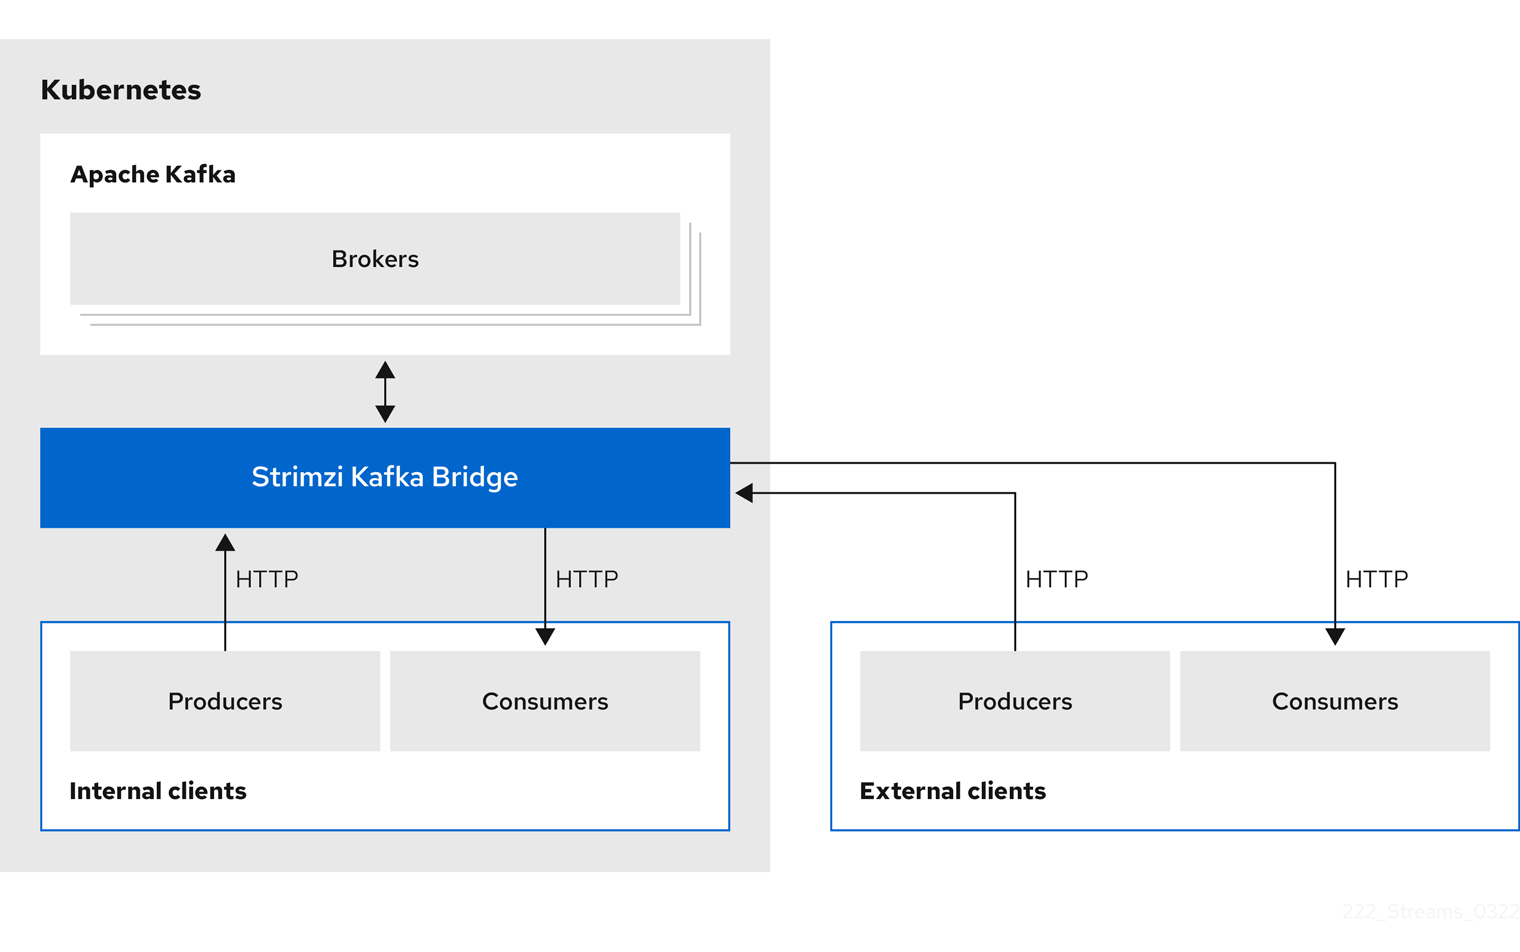 Internal and external HTTP producers and consumers exchange data with the Kafka brokers through the Kafka Bridge